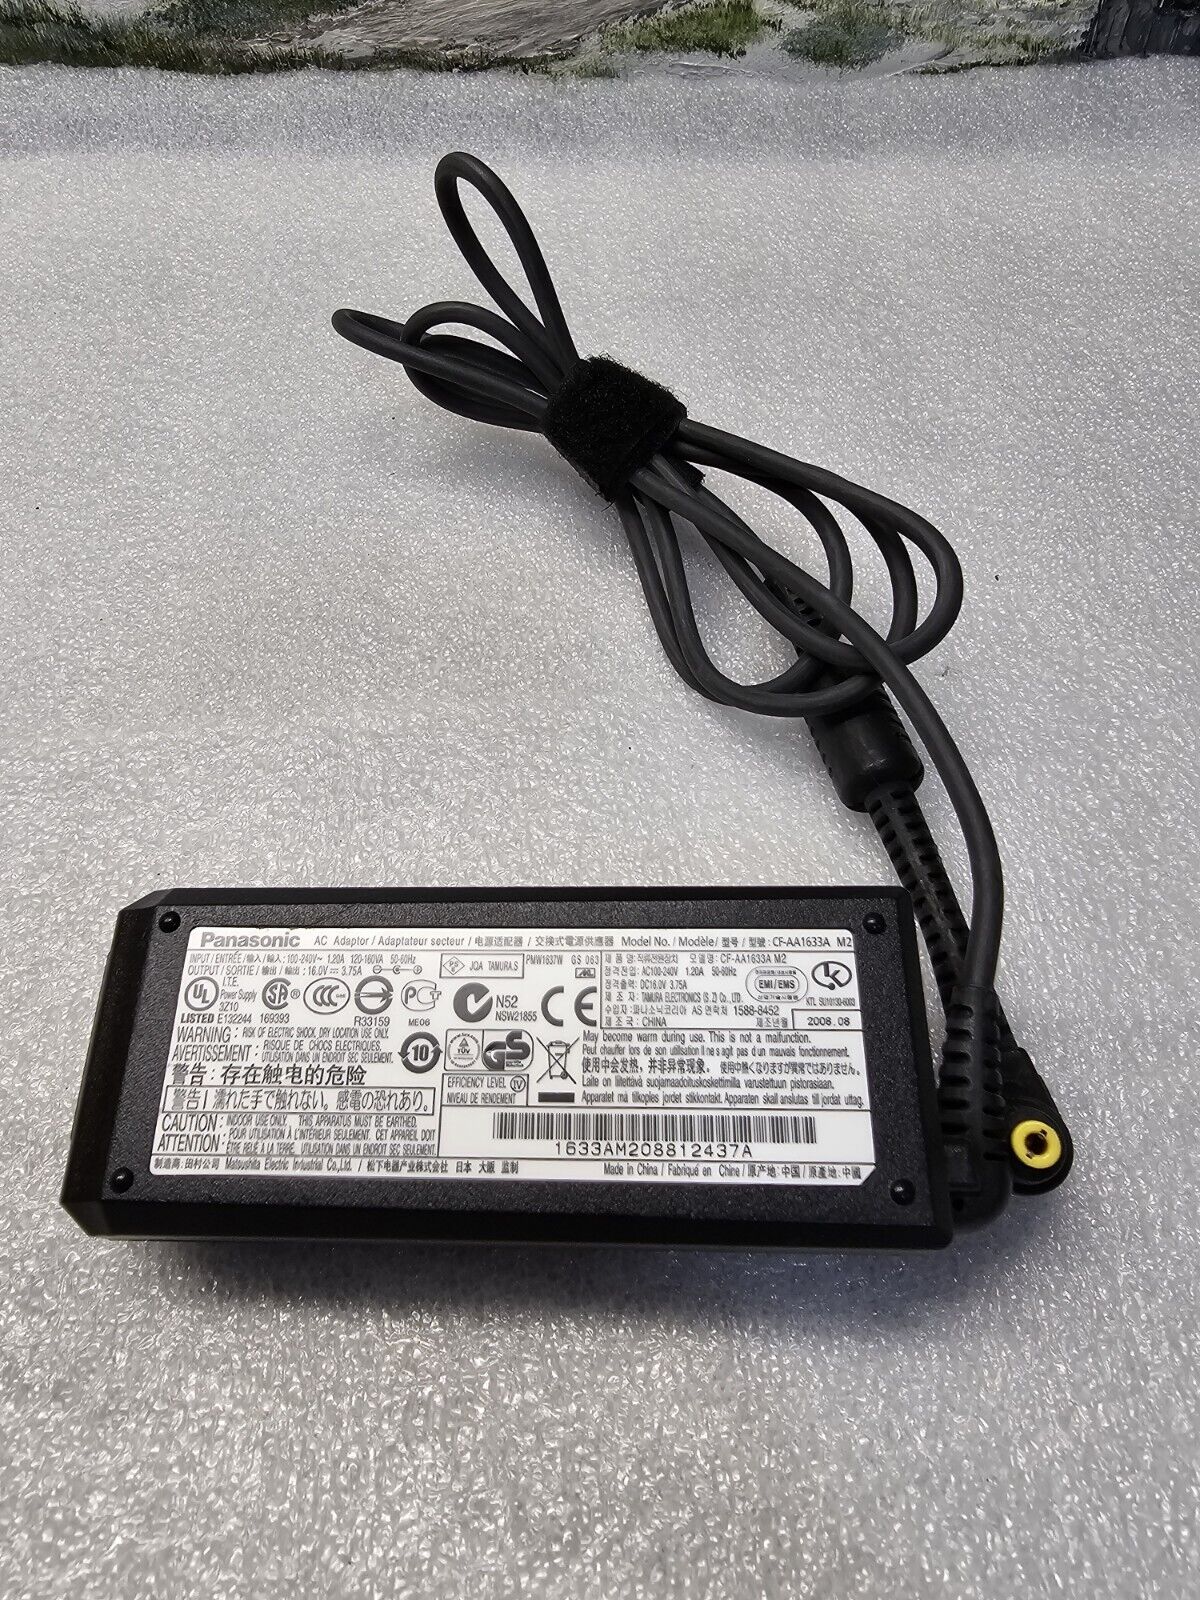 OEM CF -AA1633A M1 Genuine Panasonic 60W AC Adapter Power 16V 3.75A Charger